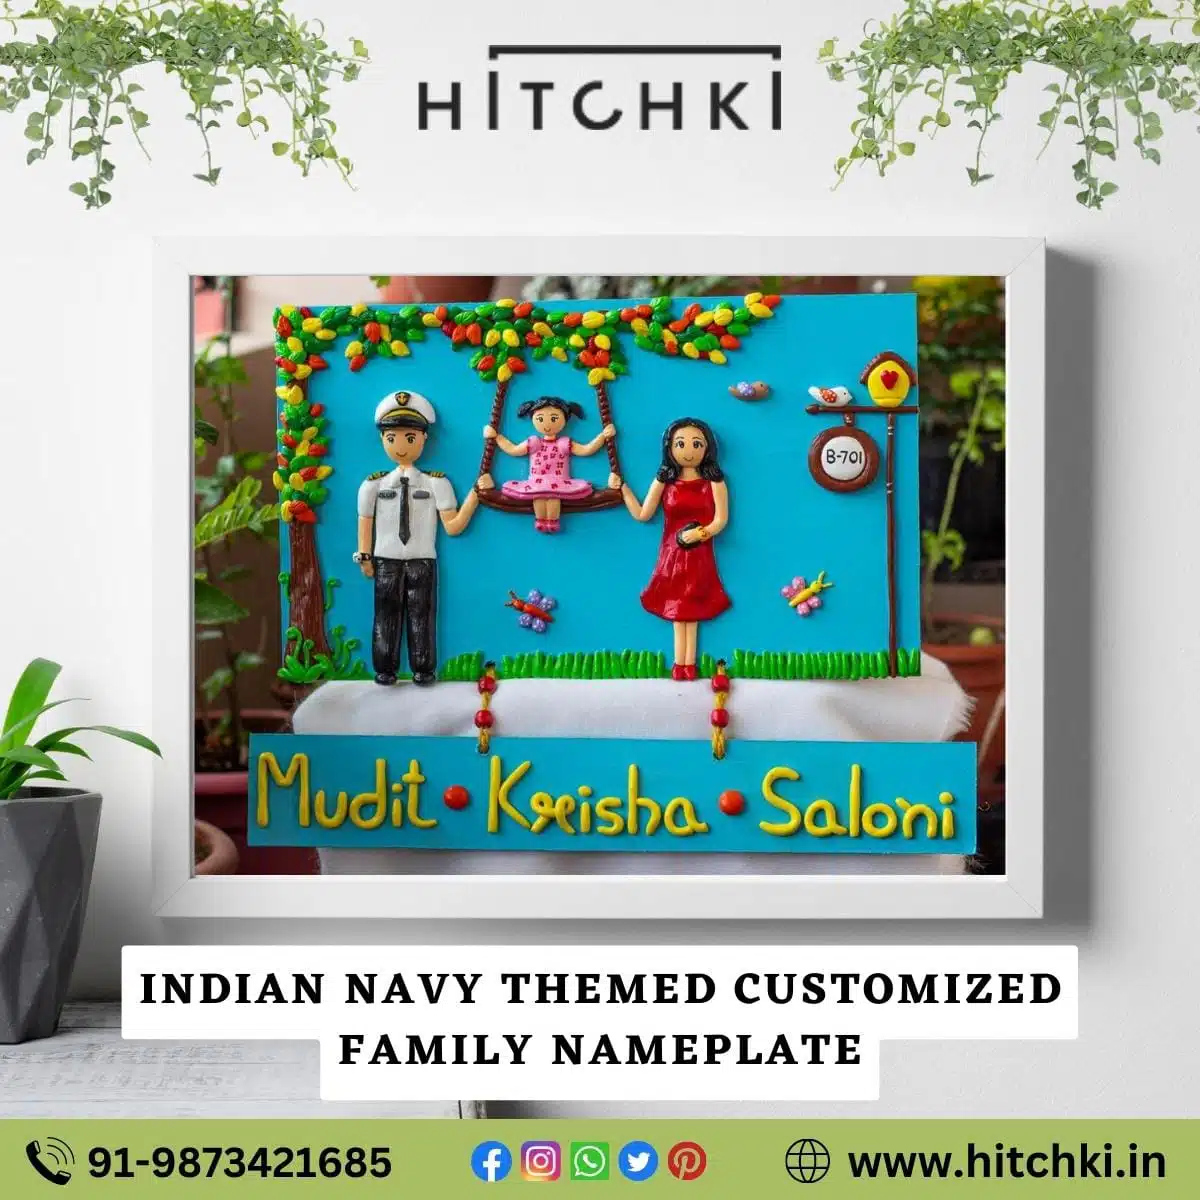 New Customized Family Nameplate Indian Navy